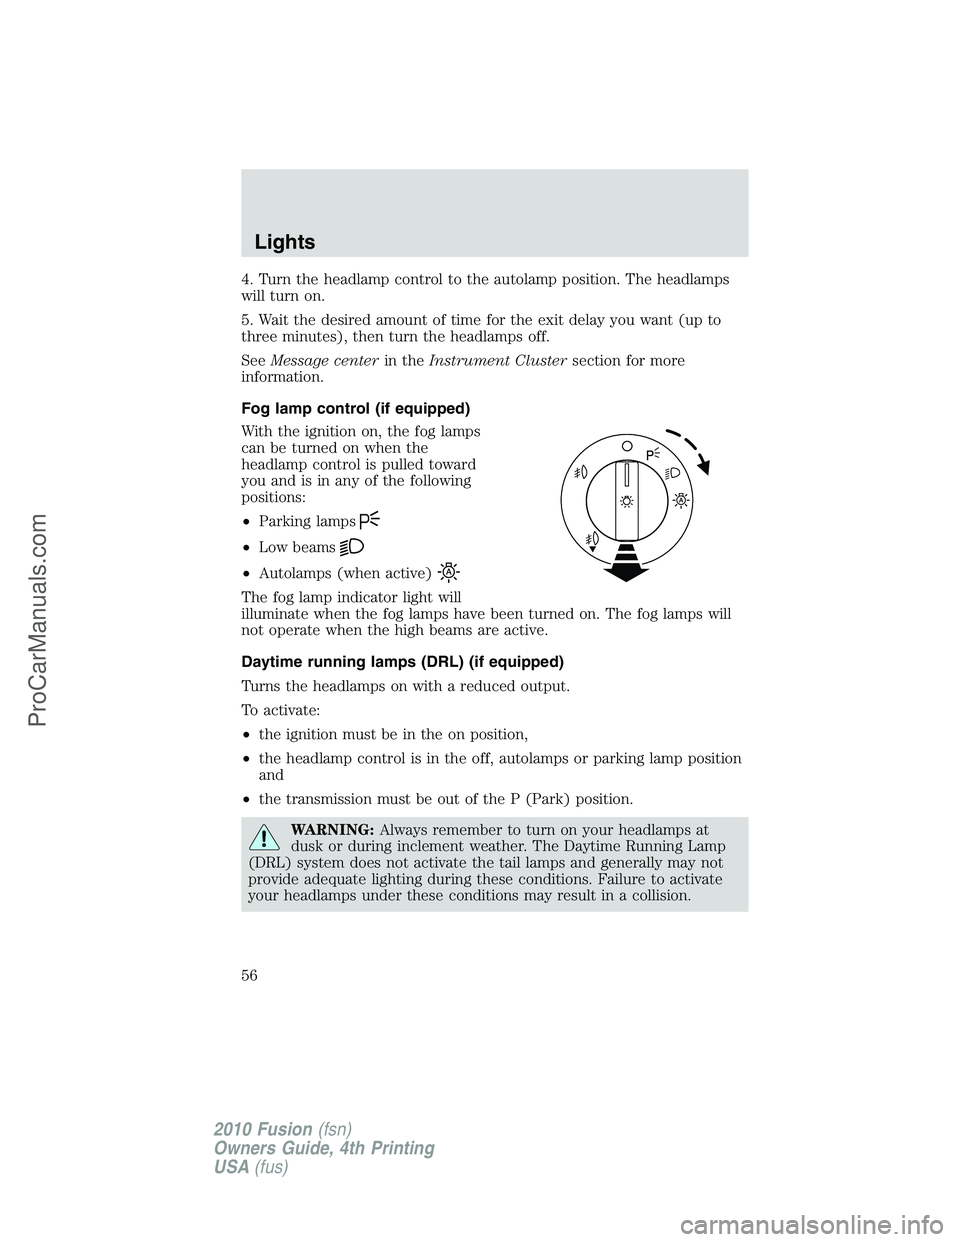 FORD FUSION 2010  Owners Manual 4. Turn the headlamp control to the autolamp position. The headlamps
will turn on.
5. Wait the desired amount of time for the exit delay you want (up to
three minutes), then turn the headlamps off.
Se